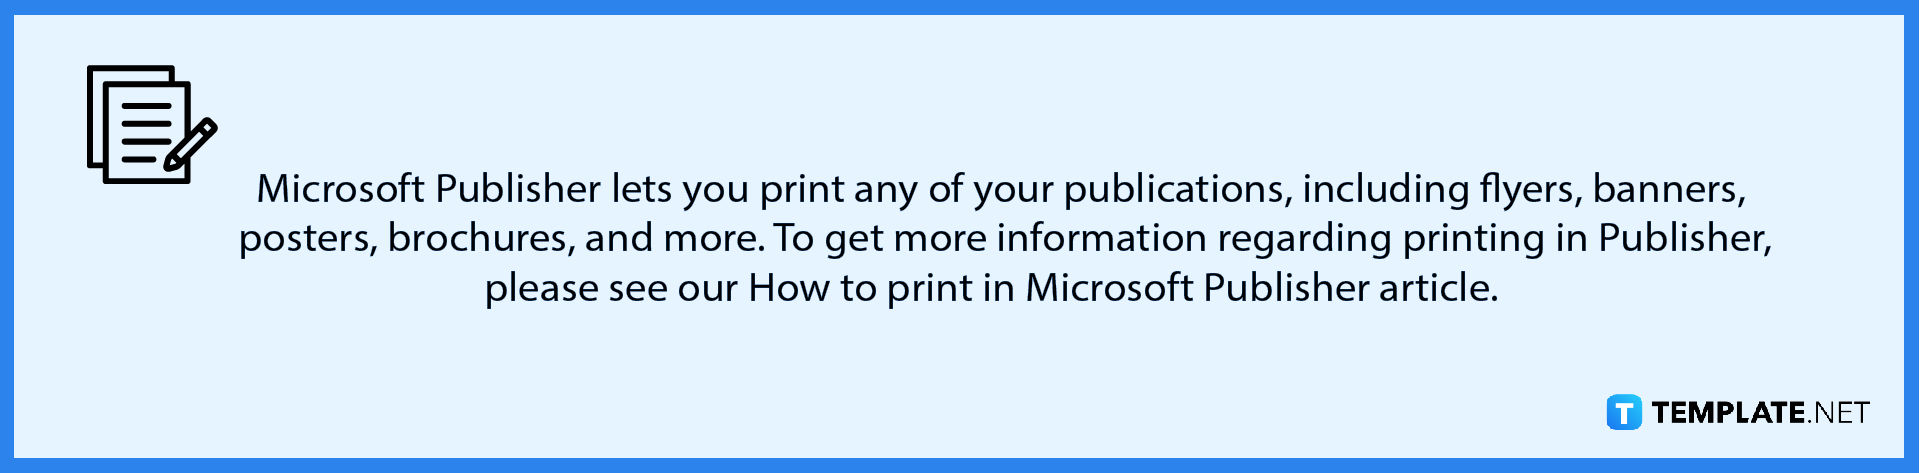 how-to-print-a-brochure-on-microsoft-publisher-note-01